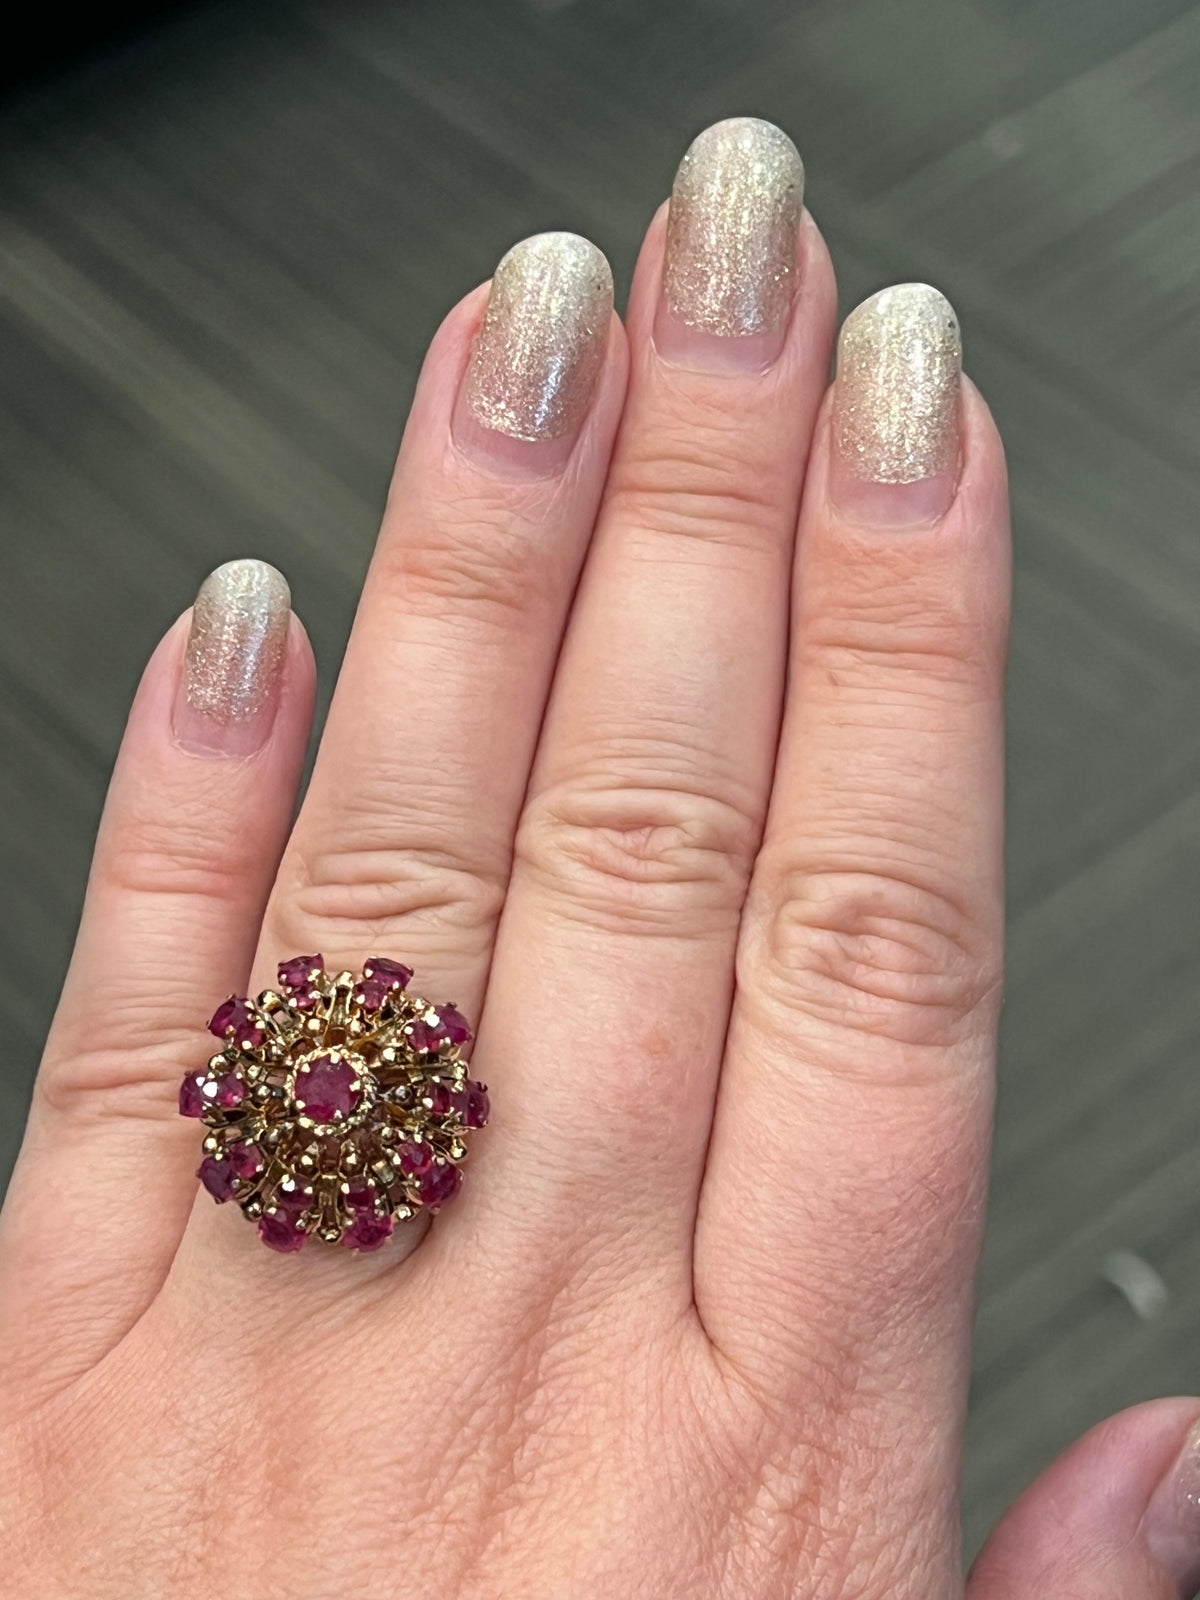 Previously Loved - Antique Ruby Cluster Ring